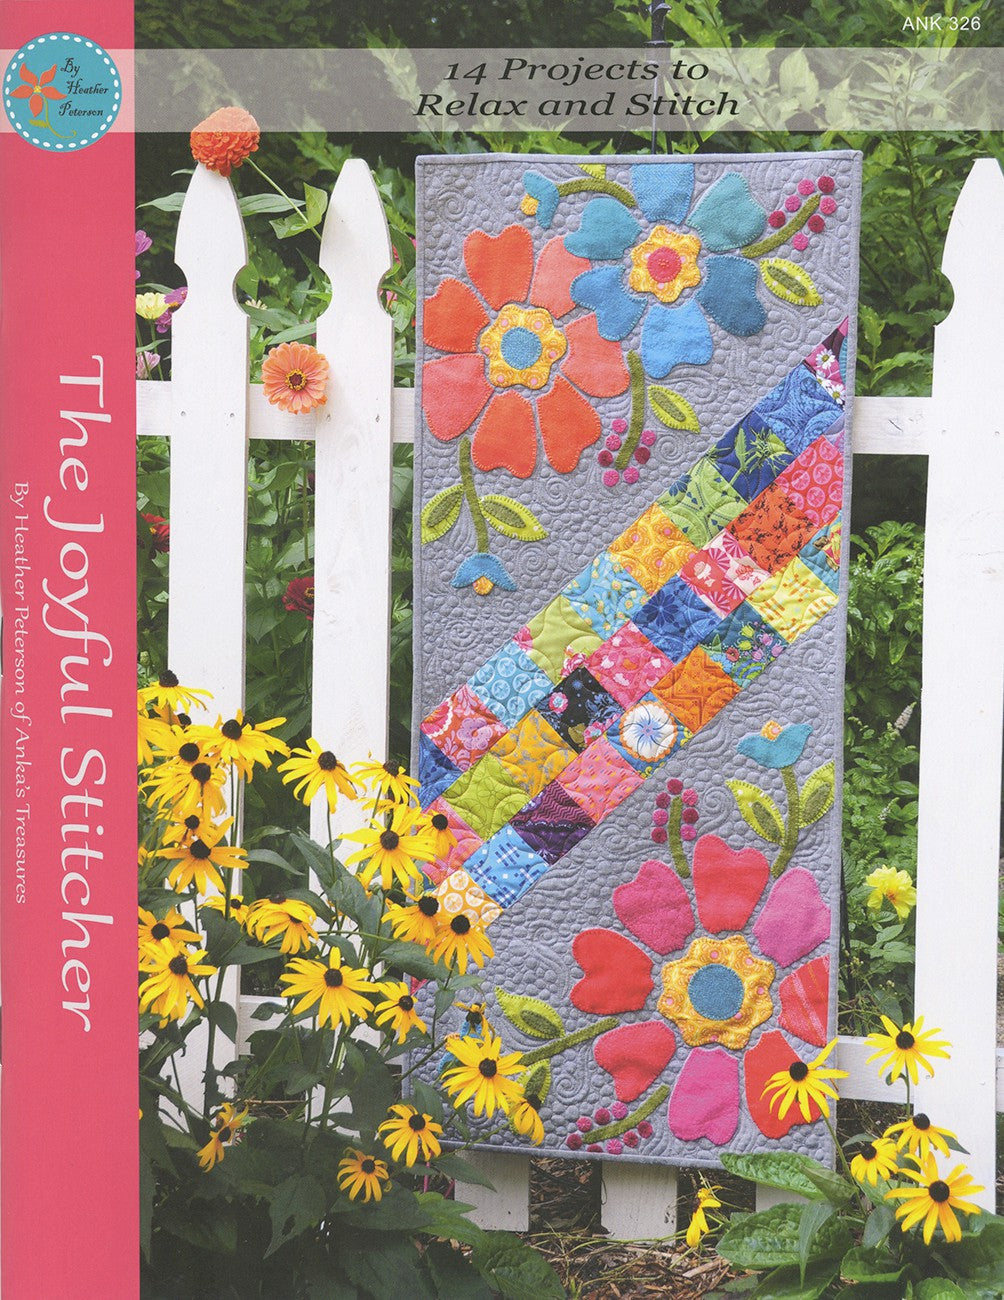 The Joyful Stitcher Quilt Pattern Book by Heather Peterson of Anka's Treasures